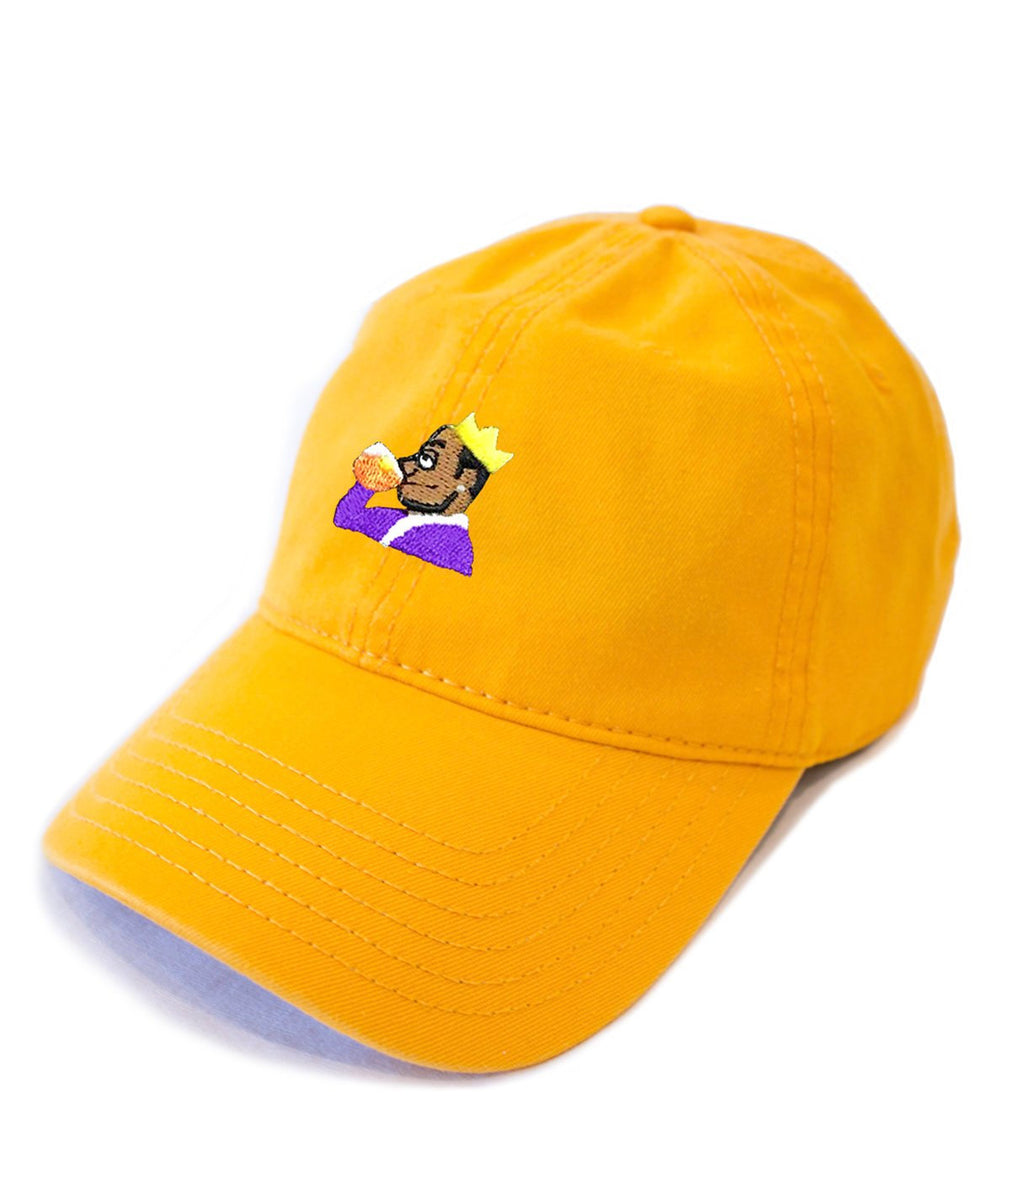 LEBRON JAMES Victory Hat, Lakers Cap, Purple and Gold, Lebron James Da –  HYPE-THREADS - Pop Culture Hype